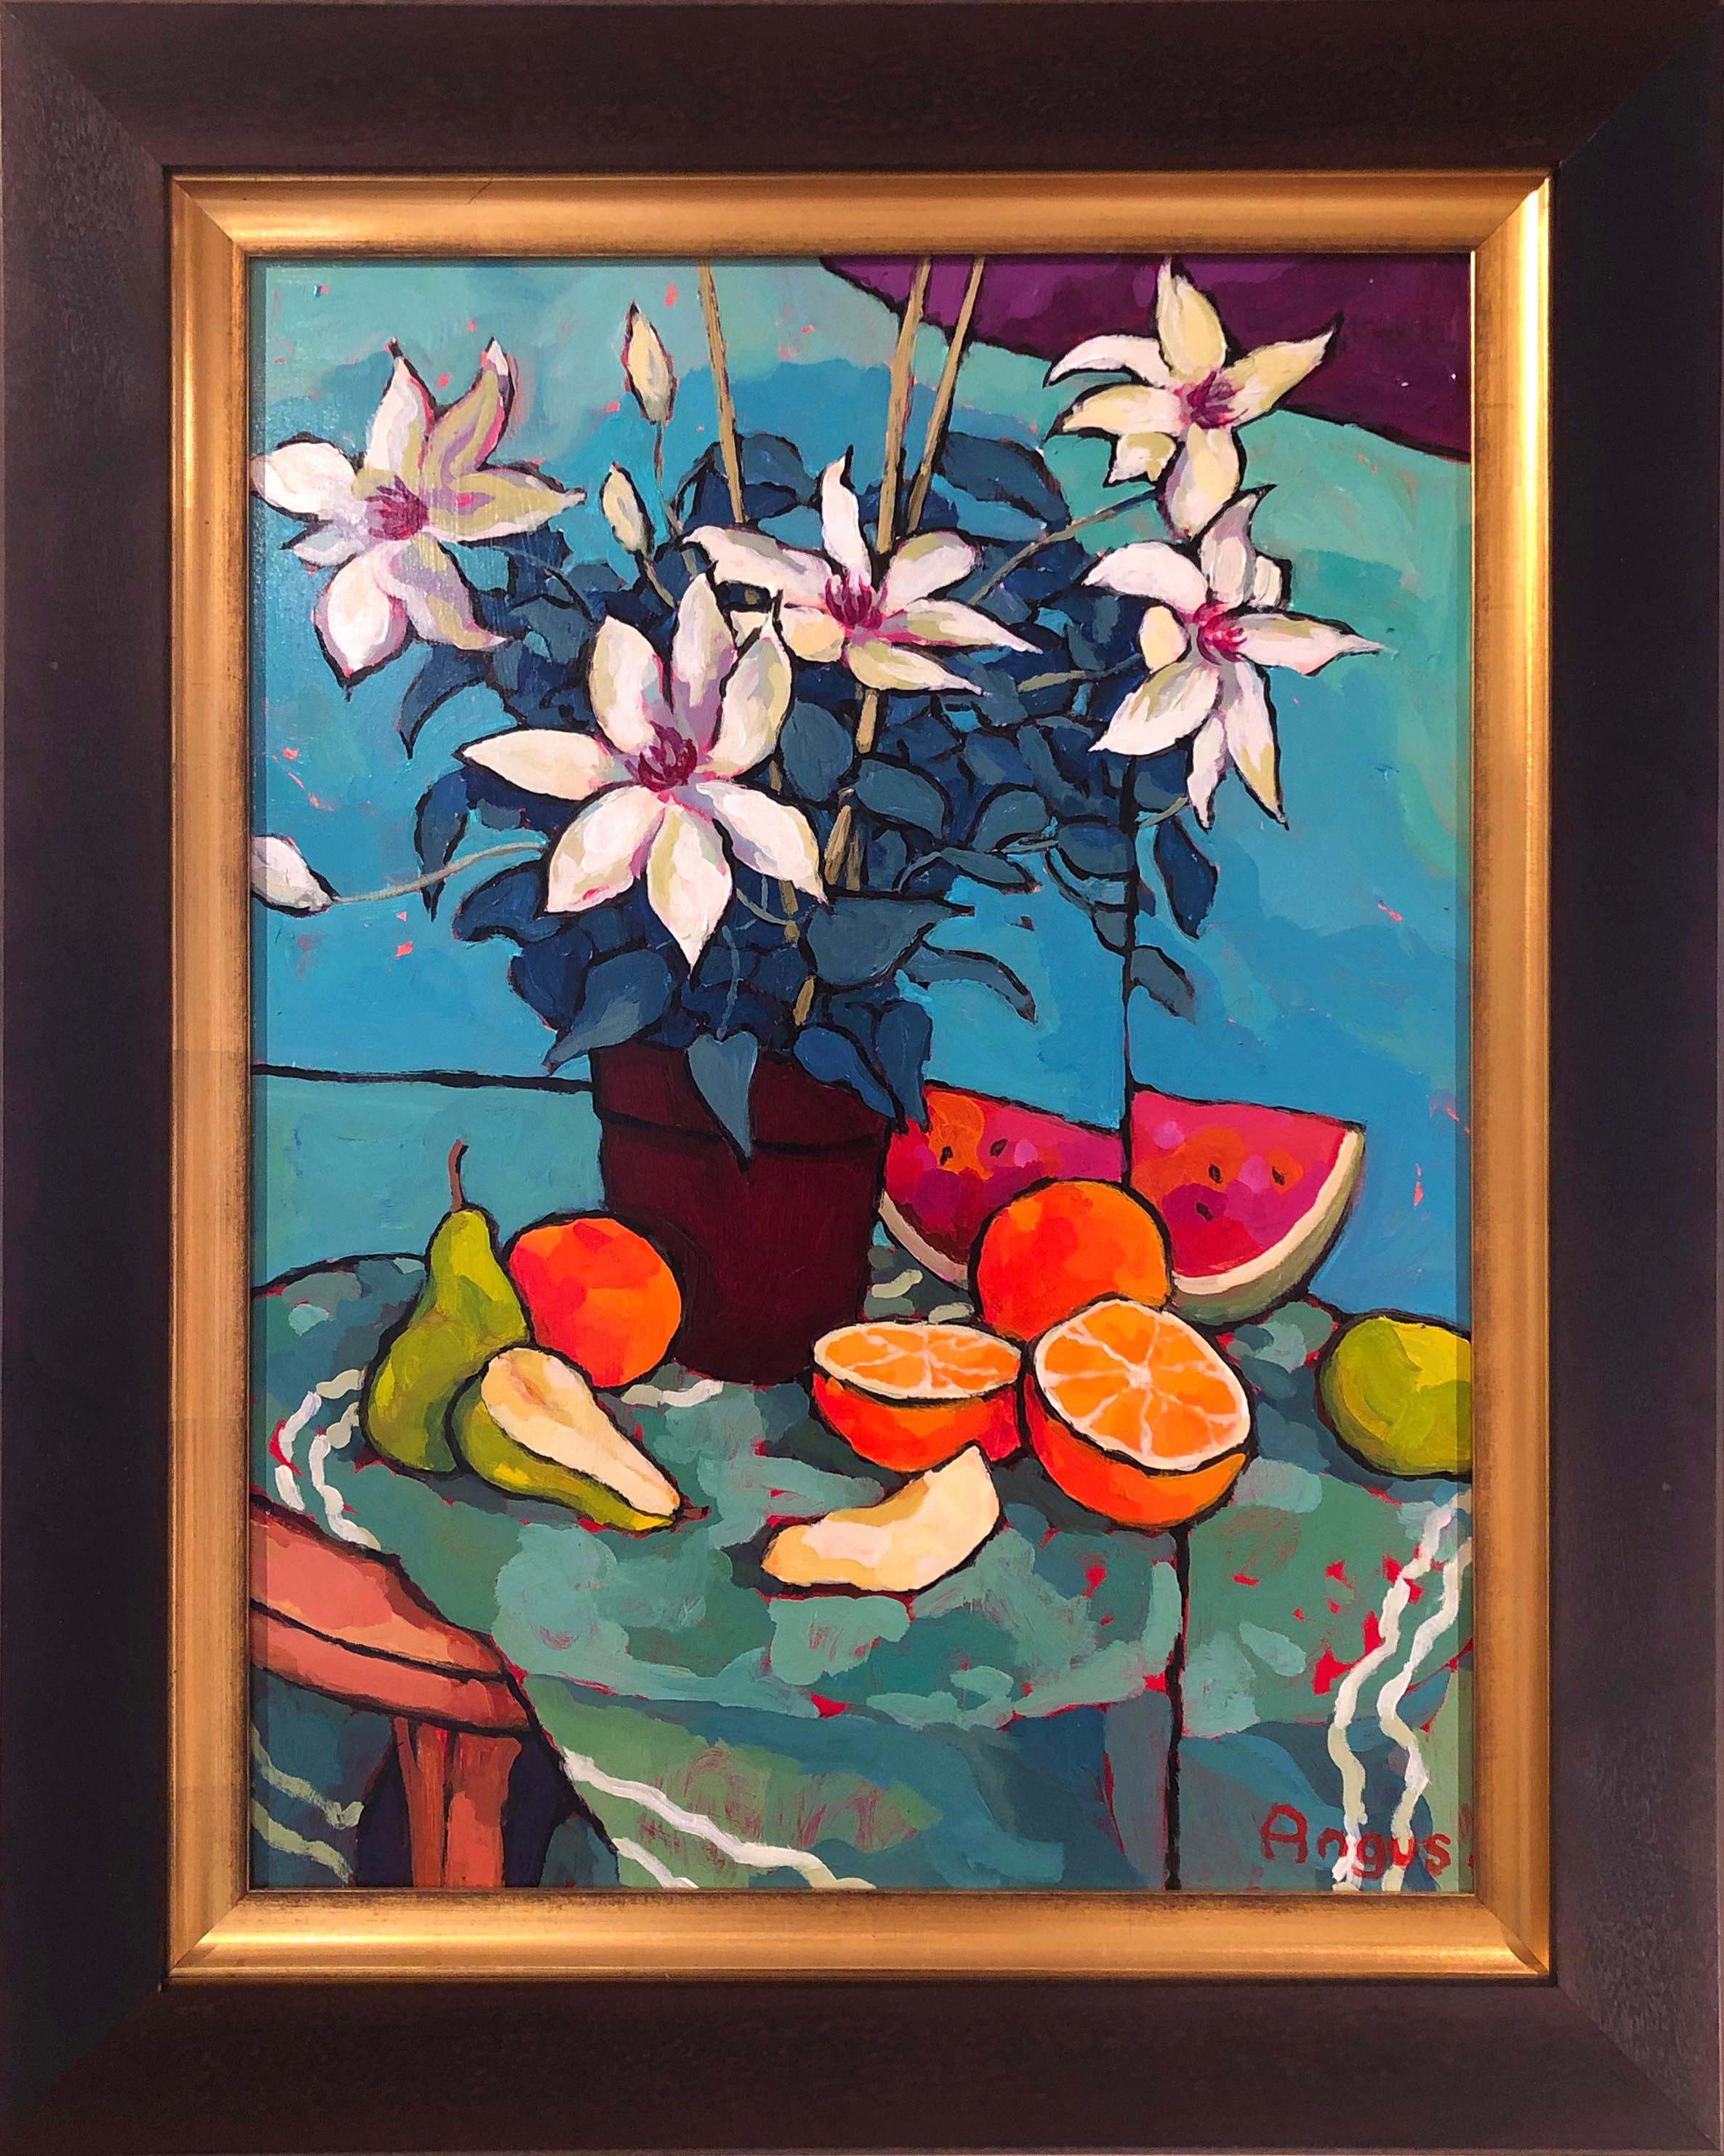 Clematis, Pears, Oranges, and Watermelon (still life, fruit, flowers, vibrant) - Painting by Angus Wilson